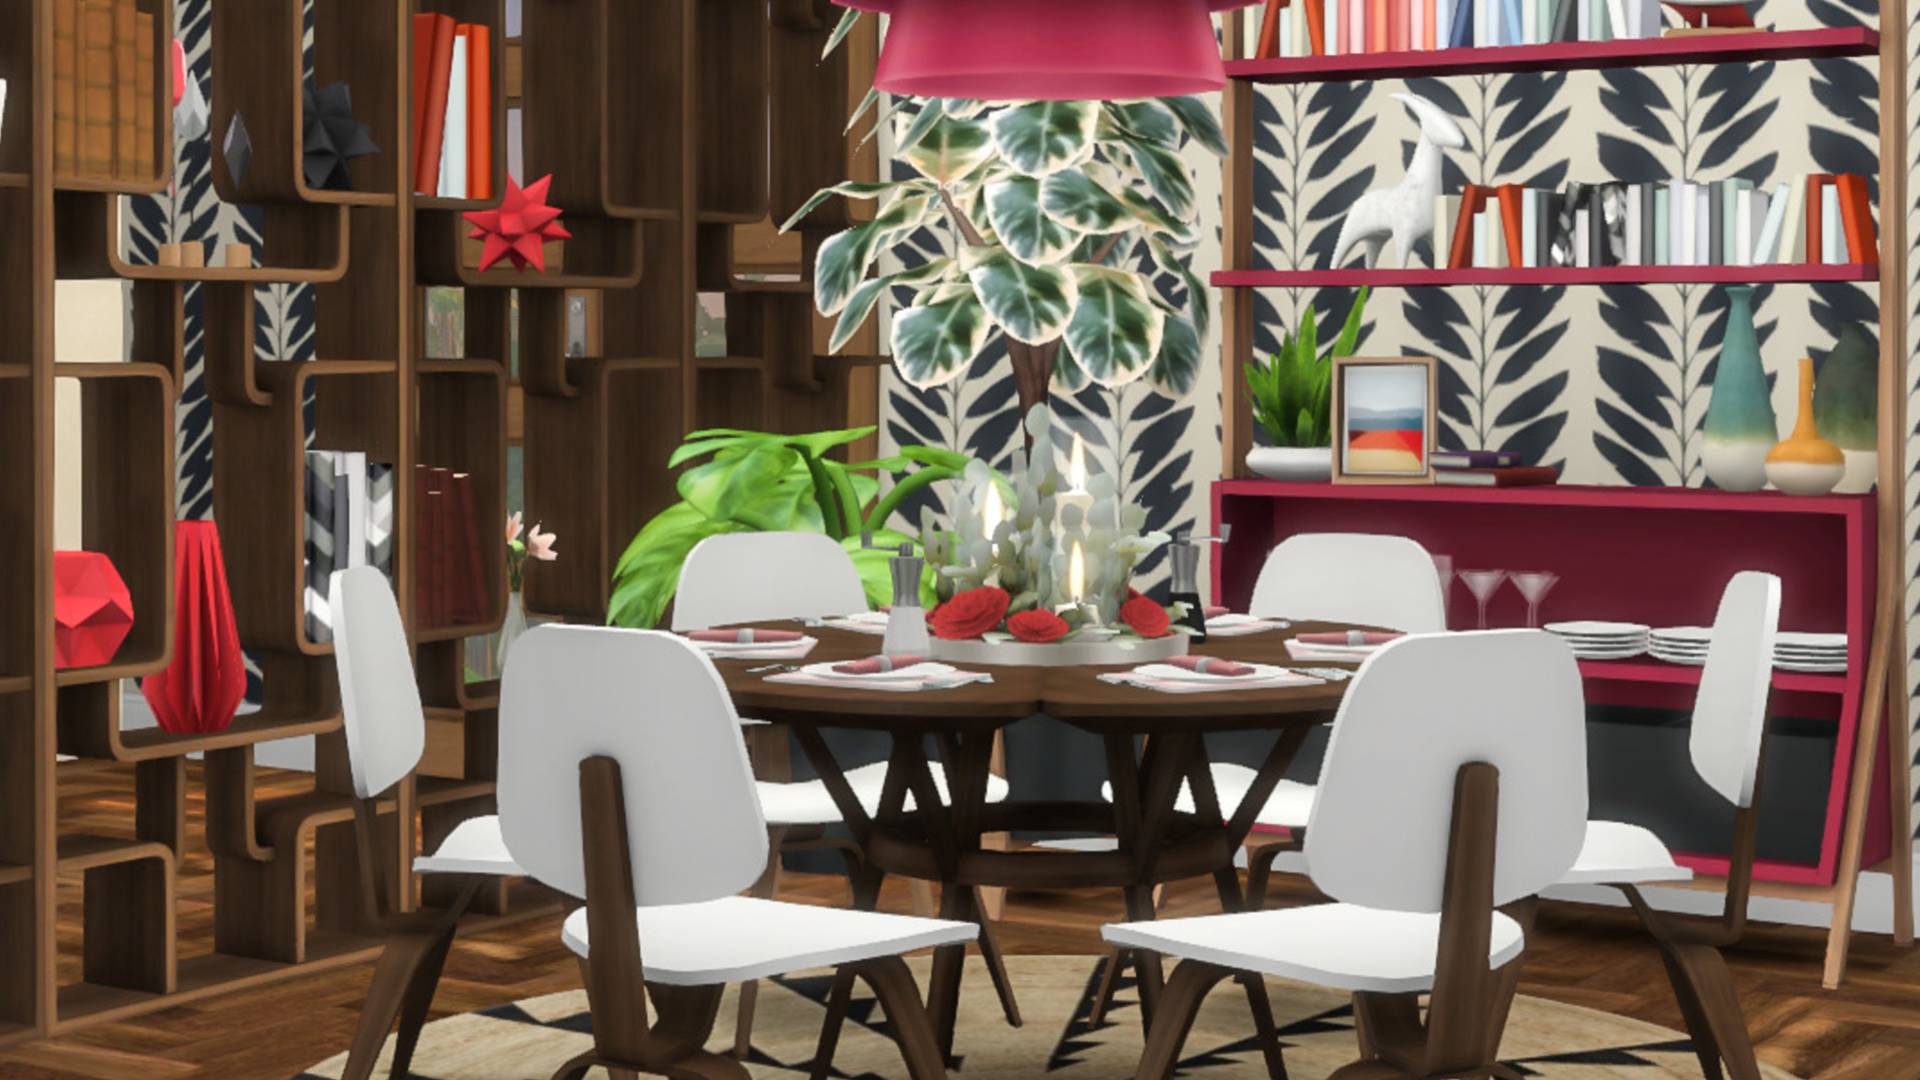 Sims 4 CC: A dining room furnished in bright, patterned decorations and furniture